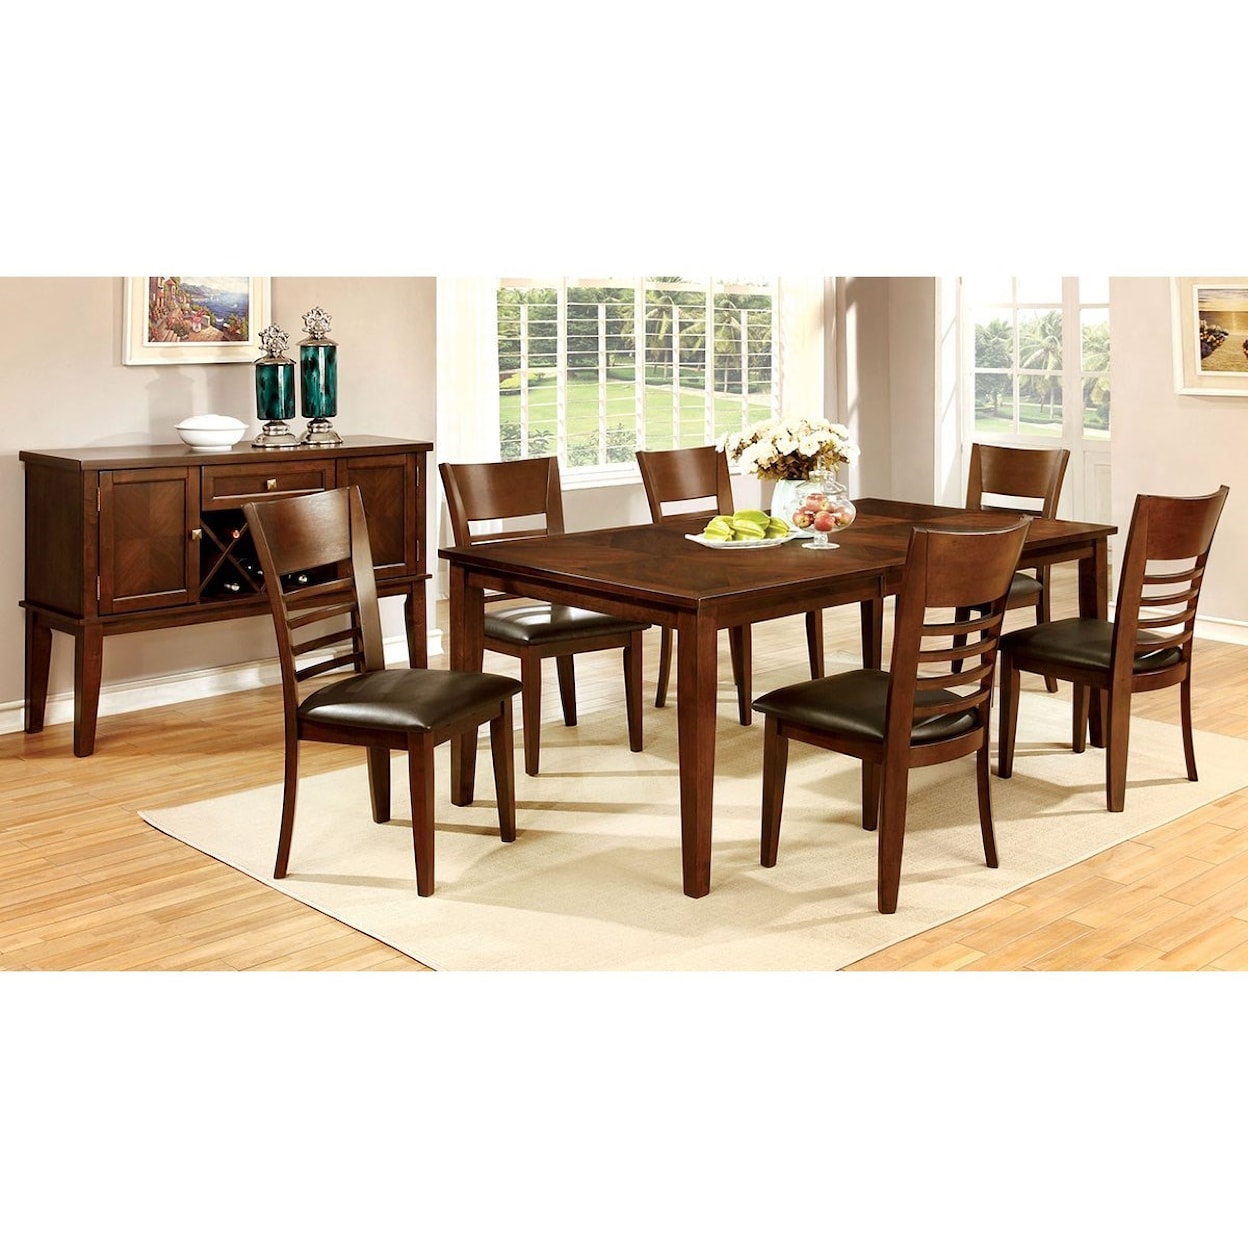 FUSA Hillsview Dining Table and Chair Set 